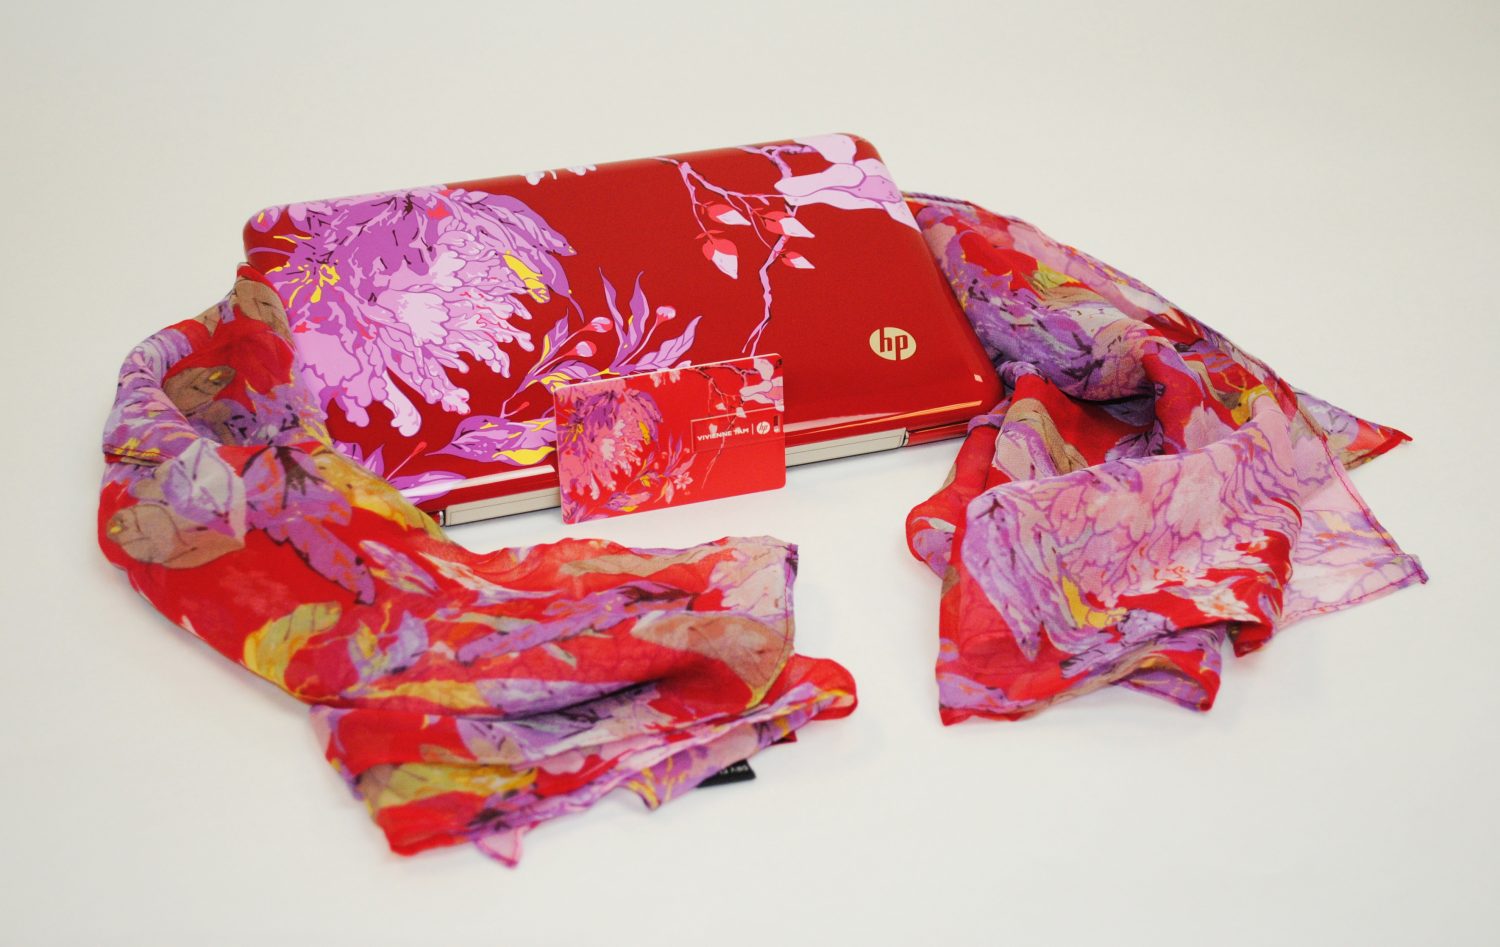 The Hewlett-Packard mini laptop designed by Vivienne Tam with a matching scarf.